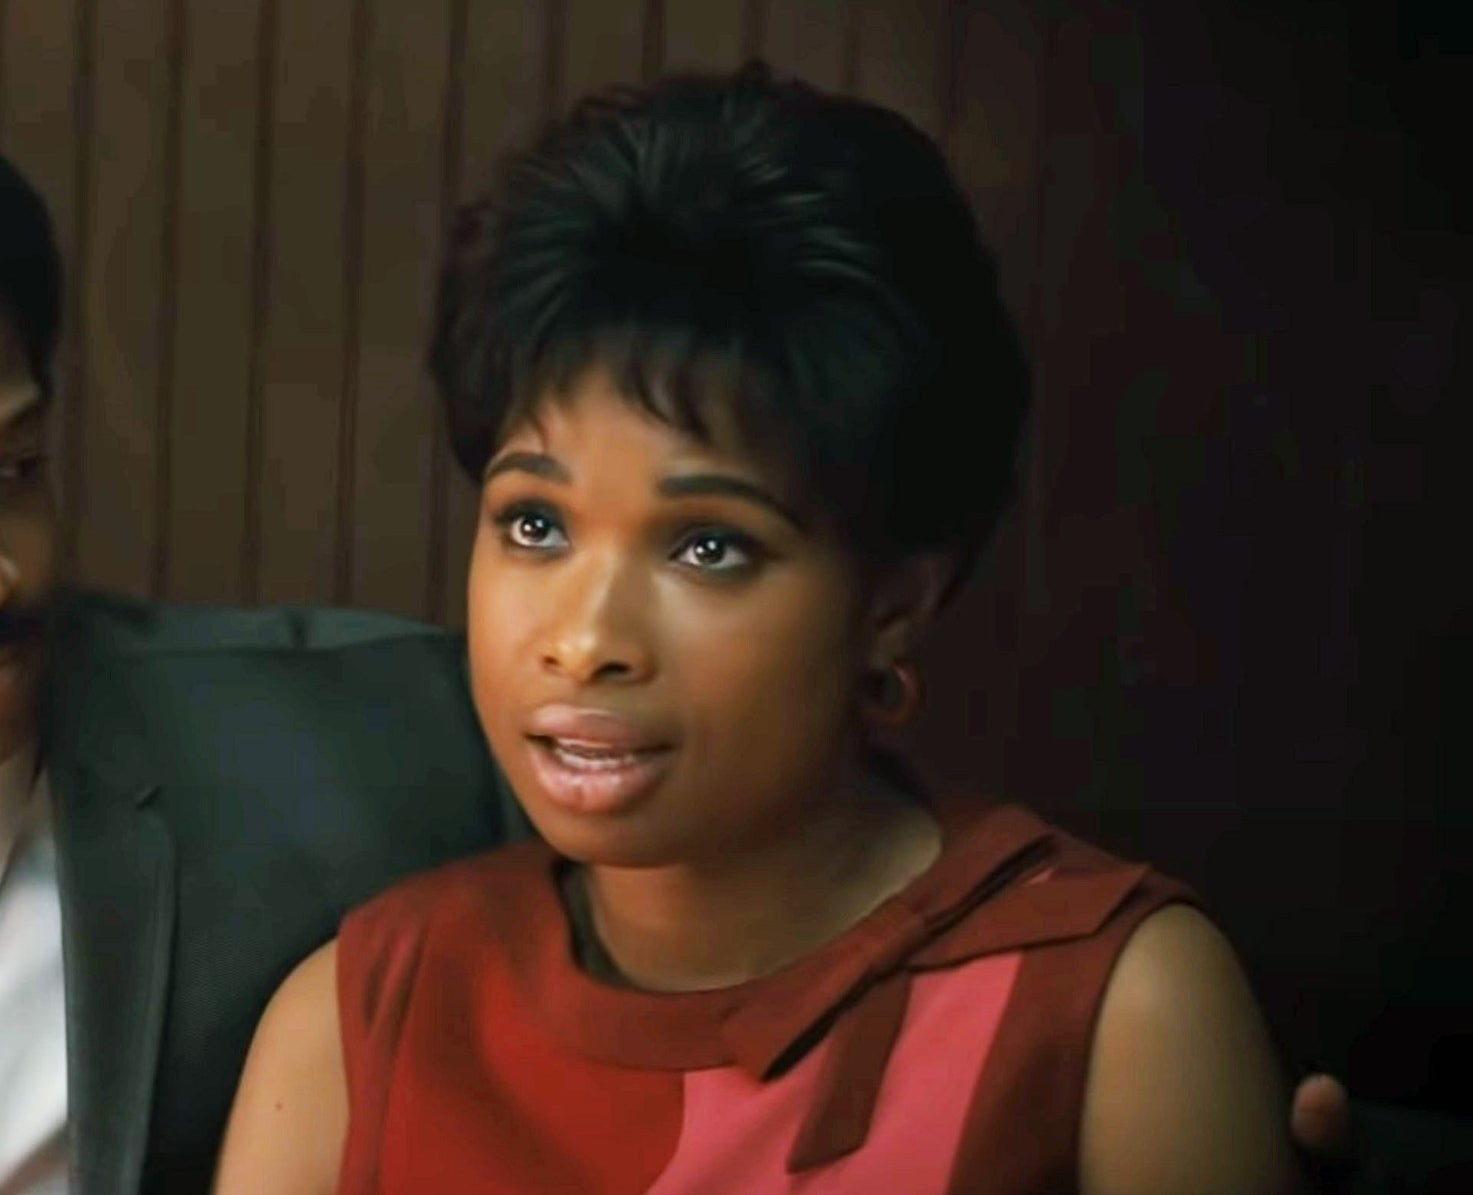 Jennifer Hudson in a &#x27;60s style outfit and hairdo as Aretha Franklin